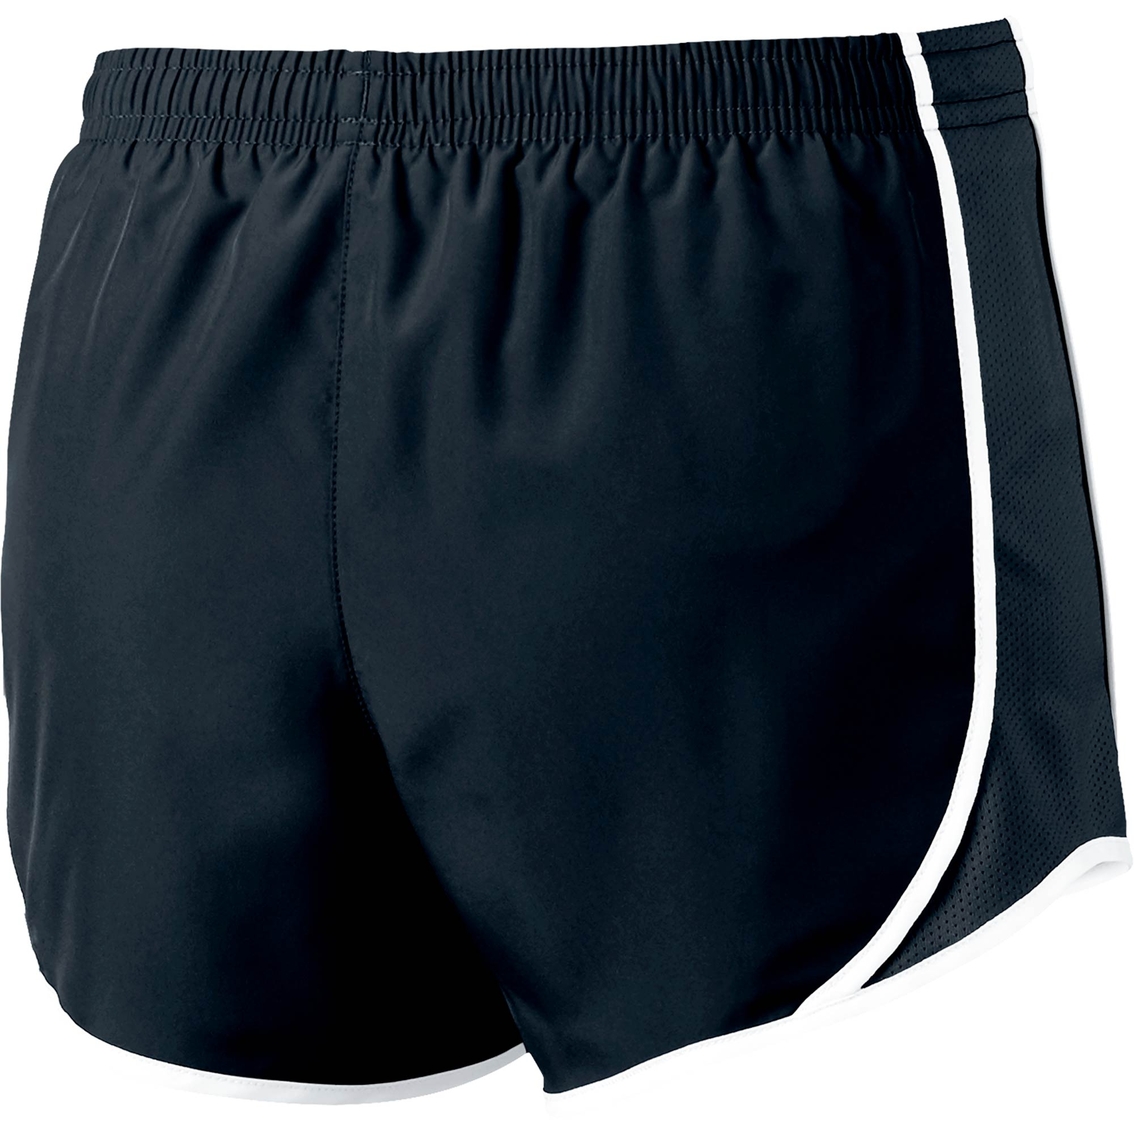 Nike Girls Tempo Shorts | Girls 7-16 | Clothing & Accessories | Shop ...